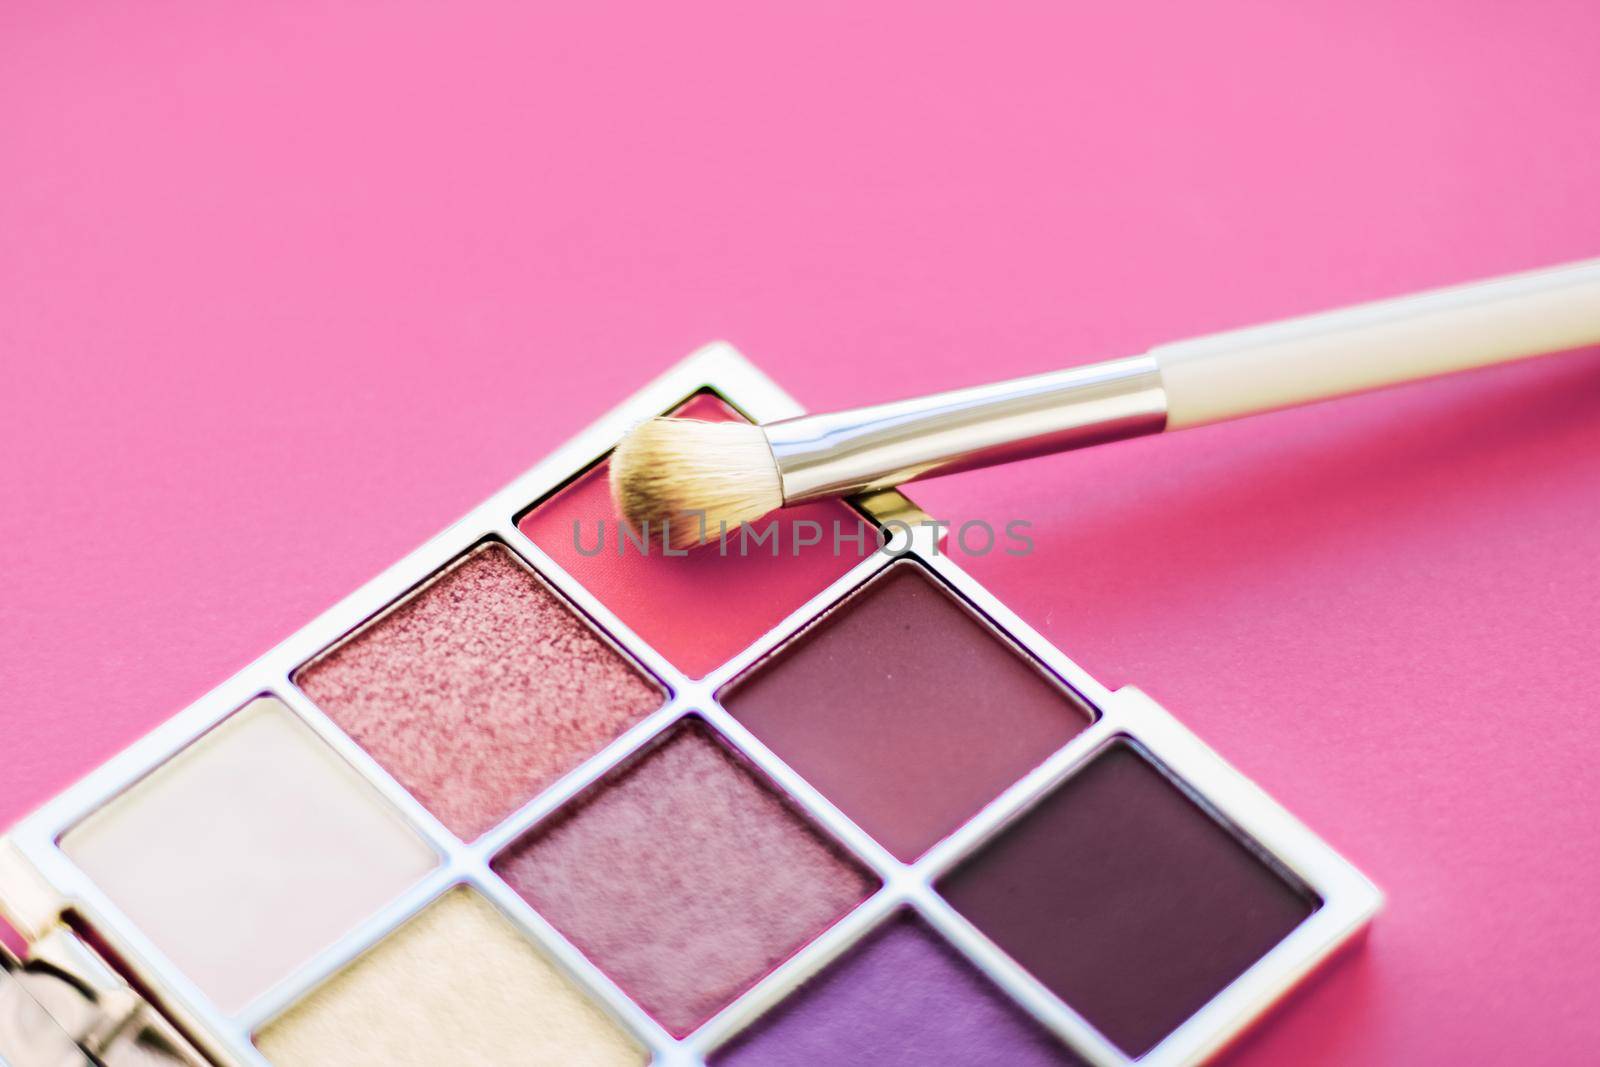 Eyeshadow palette and make-up brush on rose background, eye shadows cosmetics product for luxury beauty brand promotion and holiday fashion blog design by Anneleven